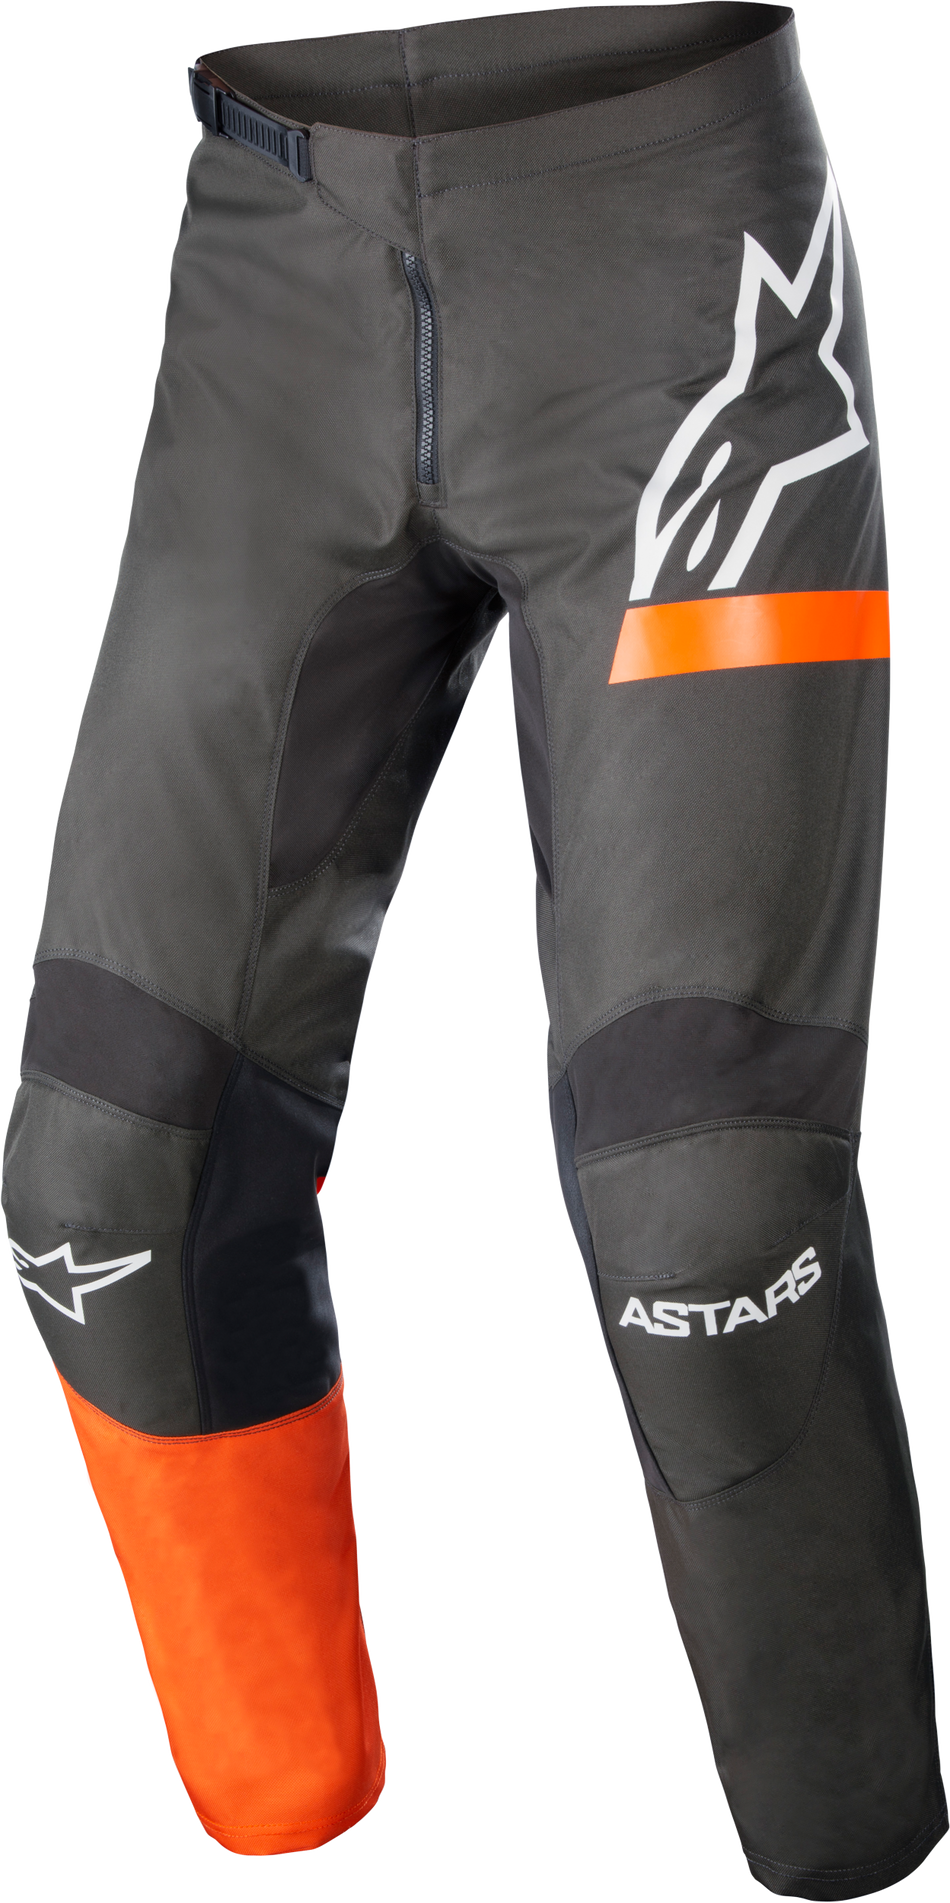 ALPINESTARS Fluid Chaser Pants Anthracite/Coral Fluo Sz 34 3722422-1794-34